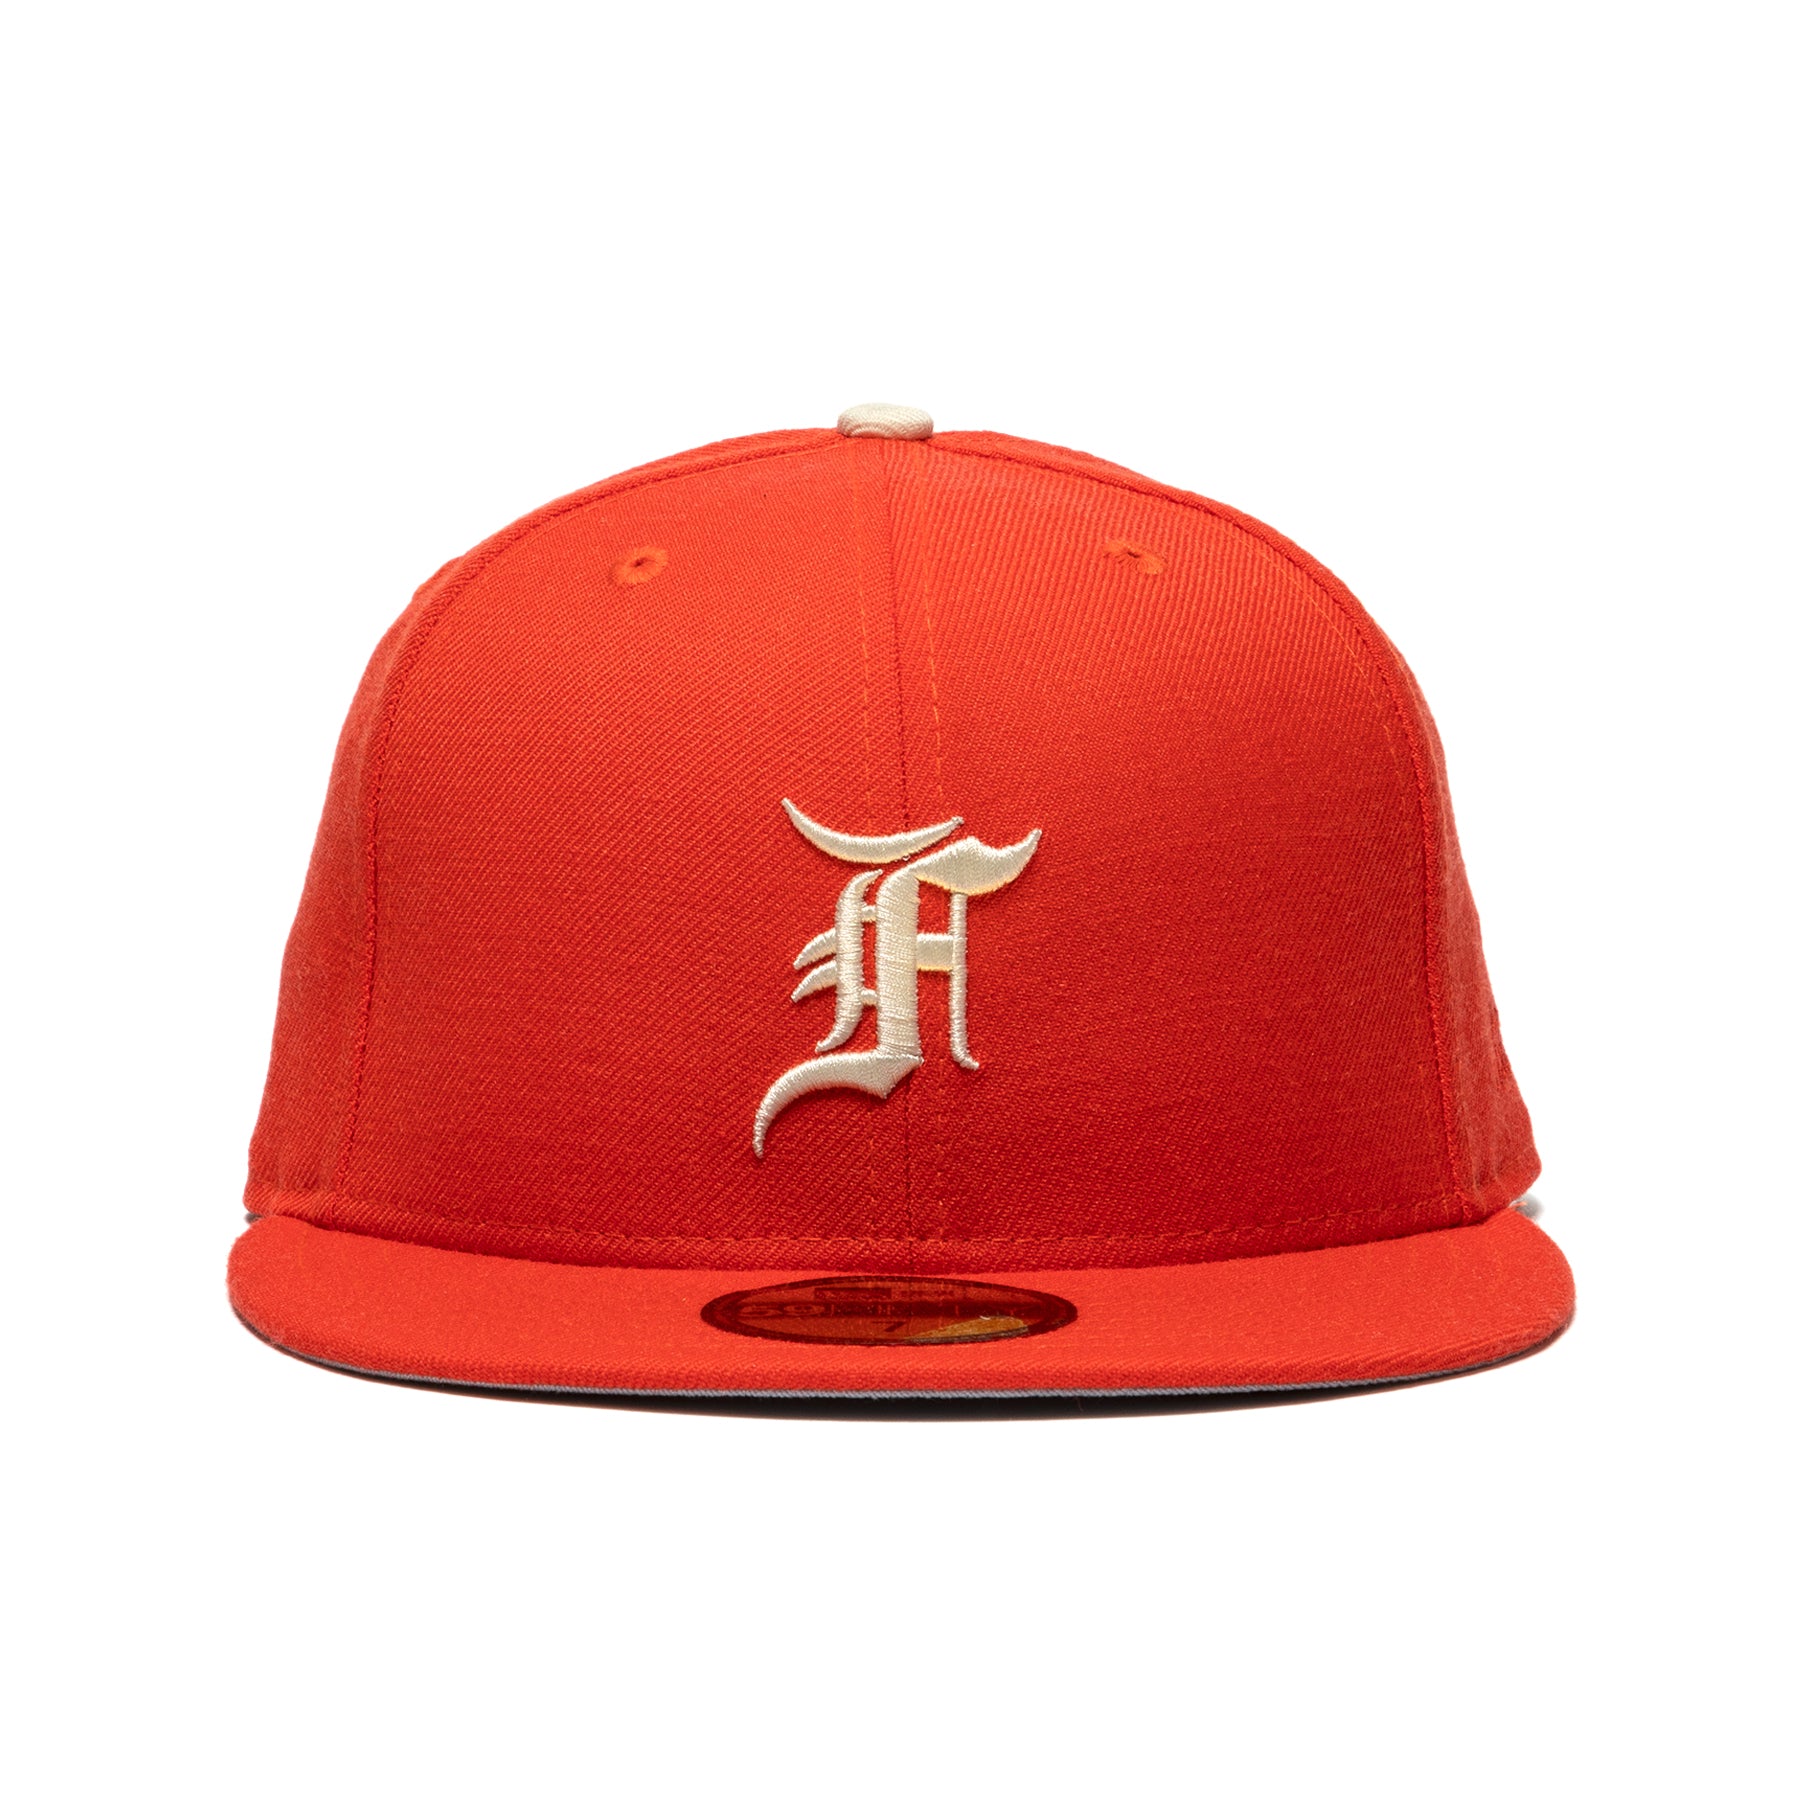 New Era x Fear of God 59FIFTY Essentials Fitted Cap (Orange/ Gray) – CNCPTS